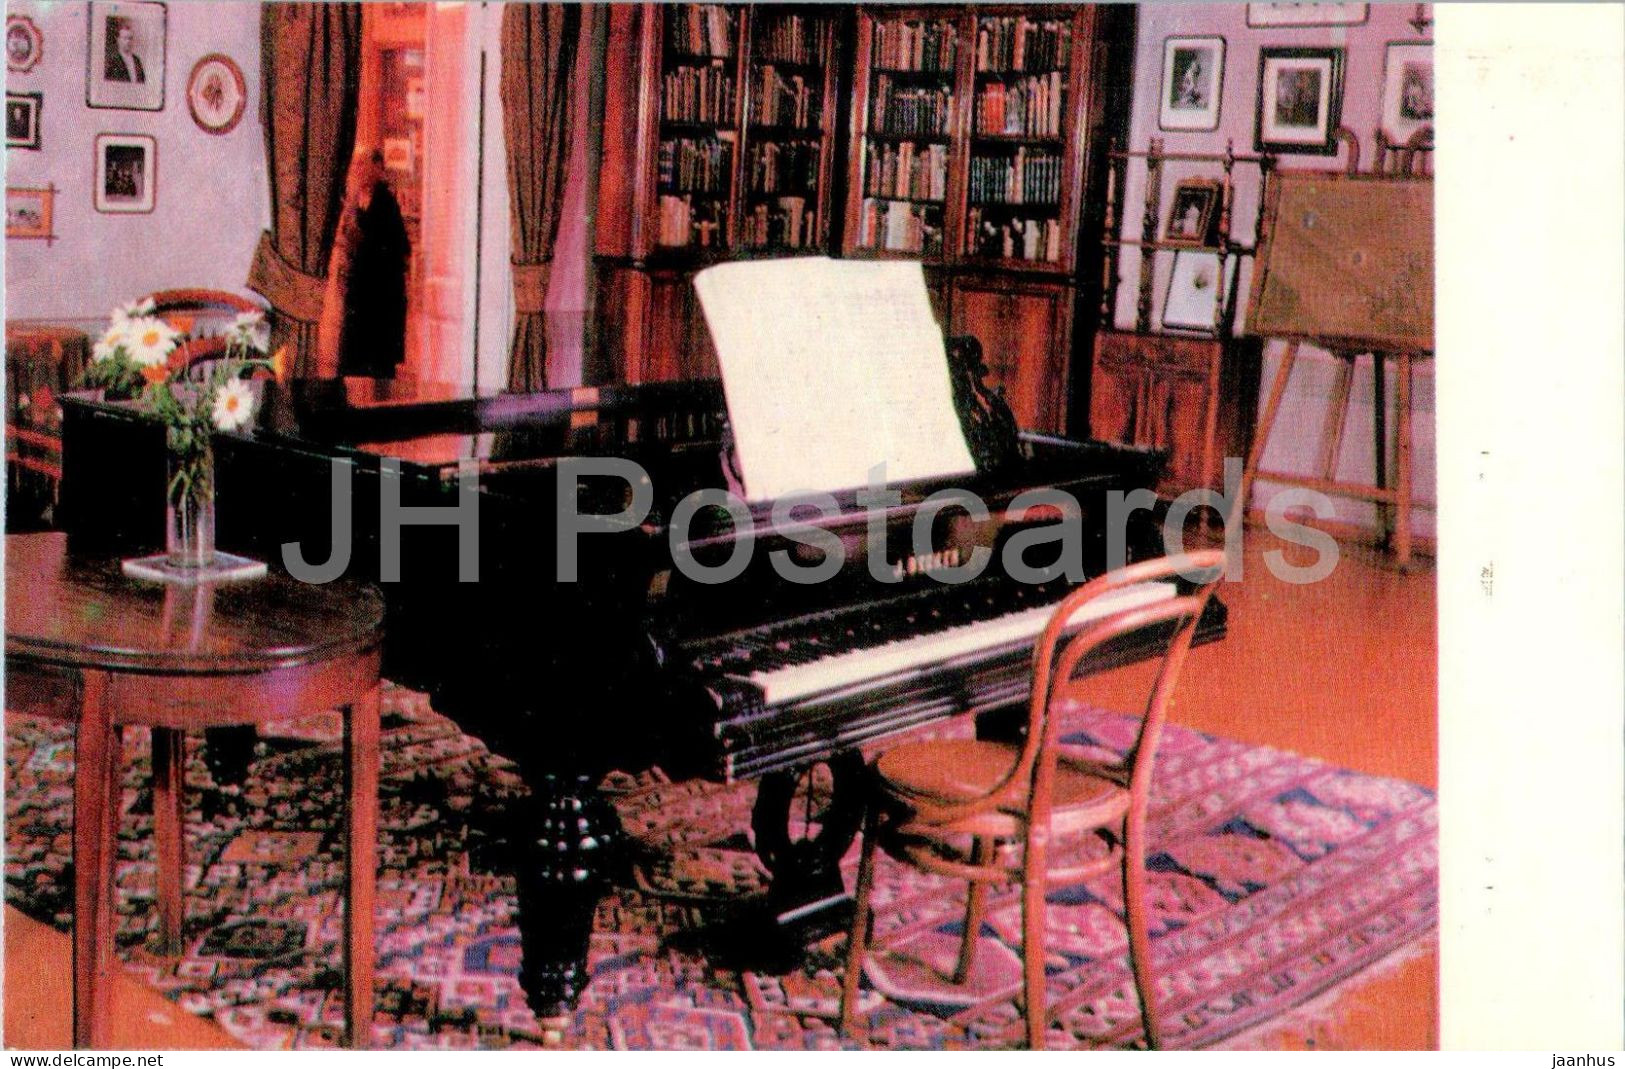 Klin - Composers Grand Piano - Russian Composer Tchaikovsky House Museum - 1971 - Russia USSR - Unused - Rusia